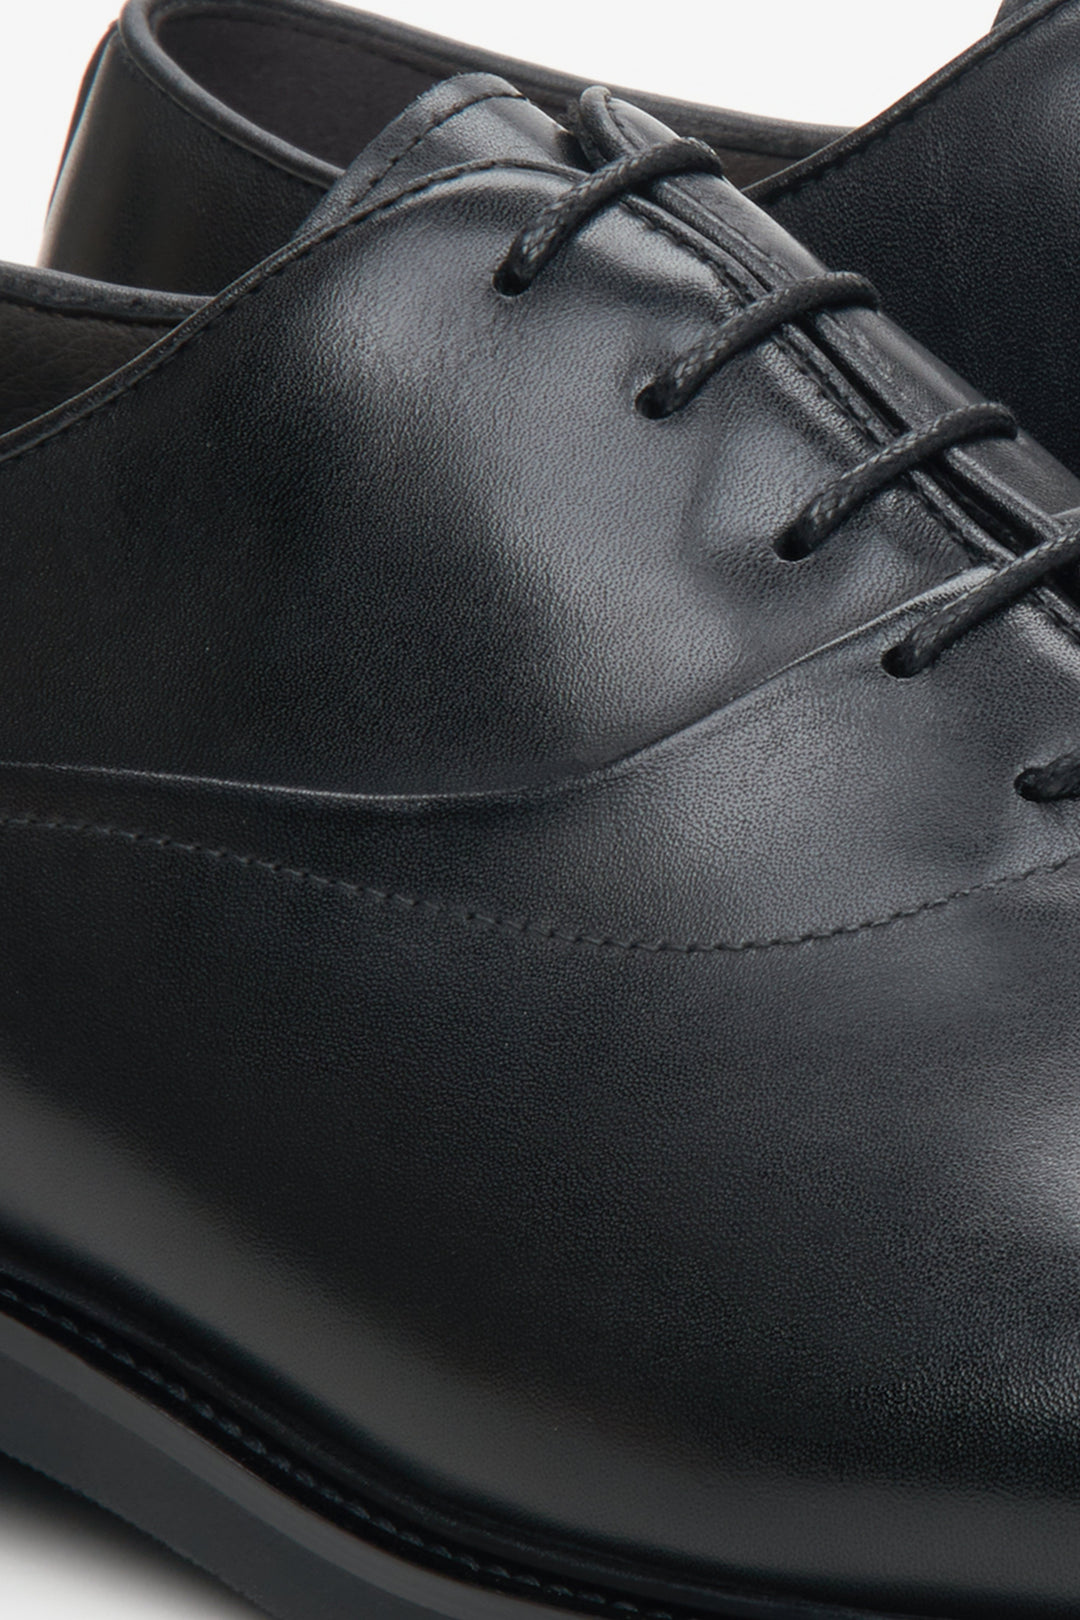 Men's Oxford-style lace-up shoes in black - close-up on the details.